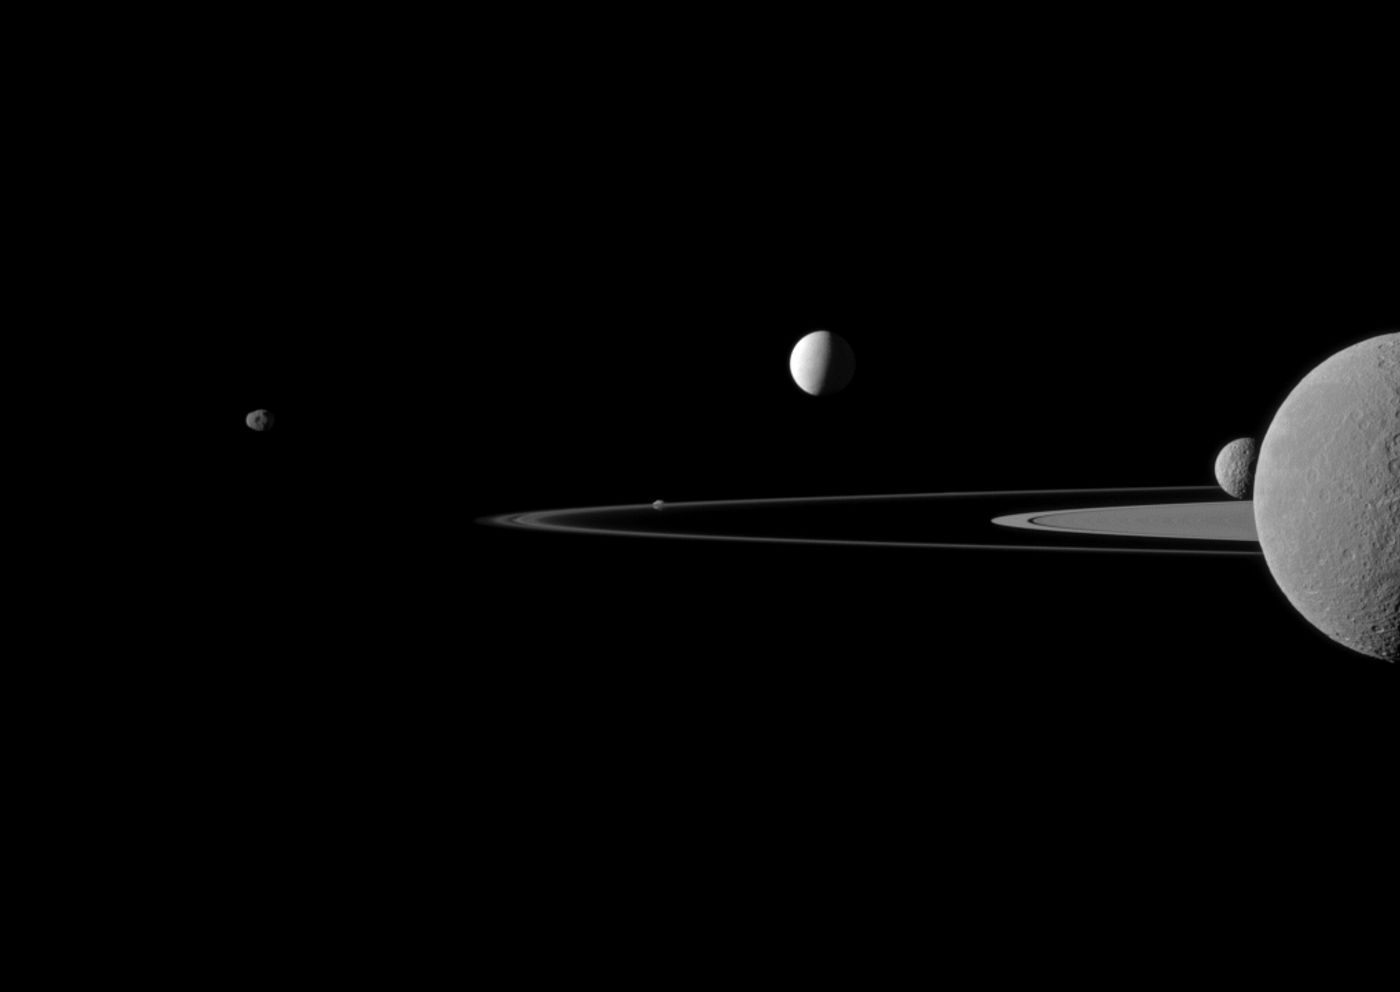 An image taken by the Cassini spacecraft of some of Saturn's moons orbiting the planet.